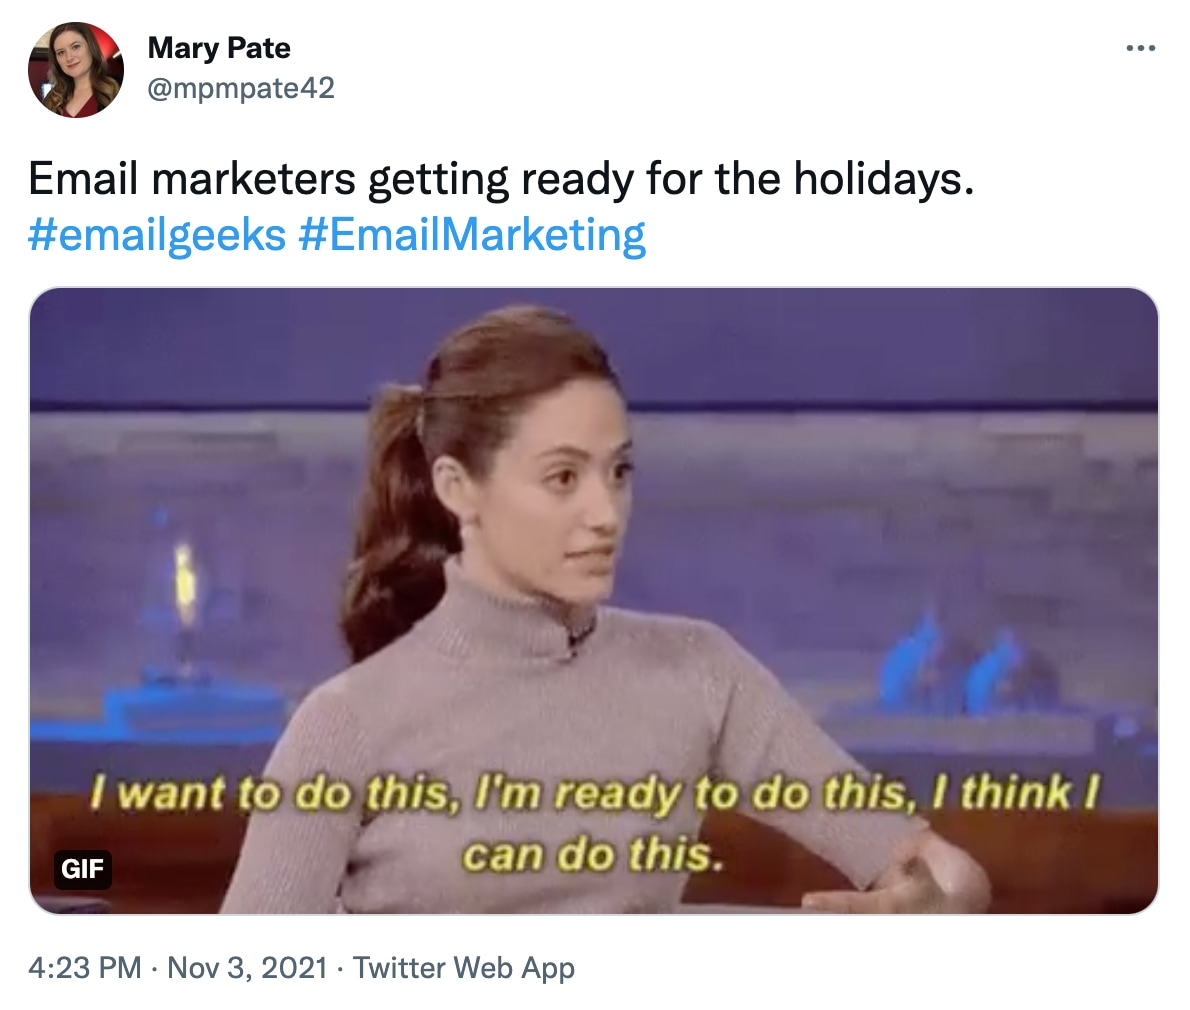 @mpmpate42 on twitter: Email marketers getting ready for the holidays. #emailgeeks #EmailMarketing